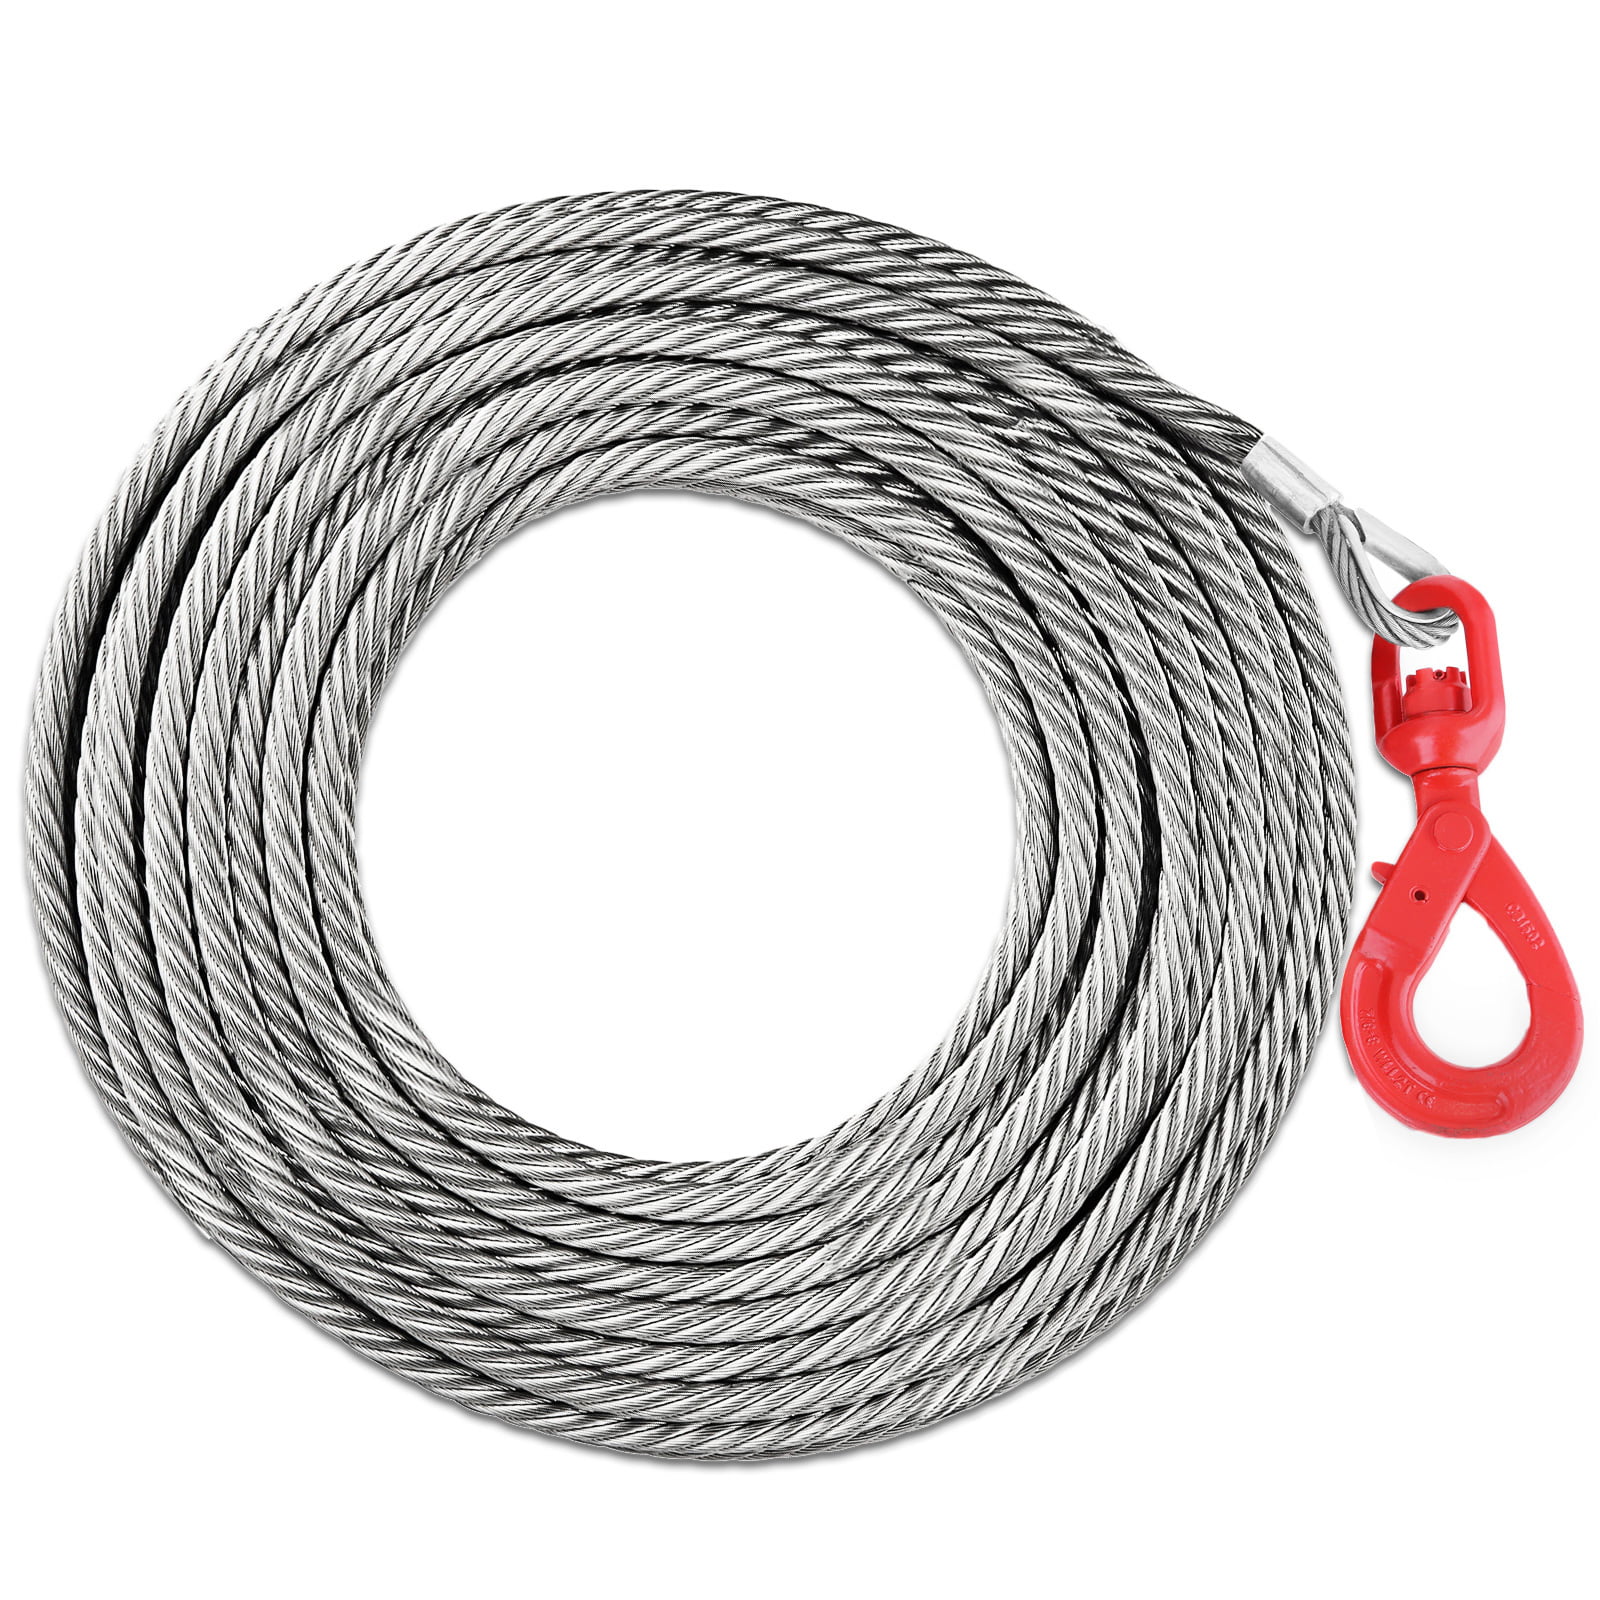 for Truck Towing Lifting Pulling VEVOR Winch Cable 4400 lbs Capacity 3/8 Inch Steel Core Winch Cable with Hook Steel Cable Wire Rope with Self-Locking Swivel Hook Winch Wire Cable 50 Ft Length 